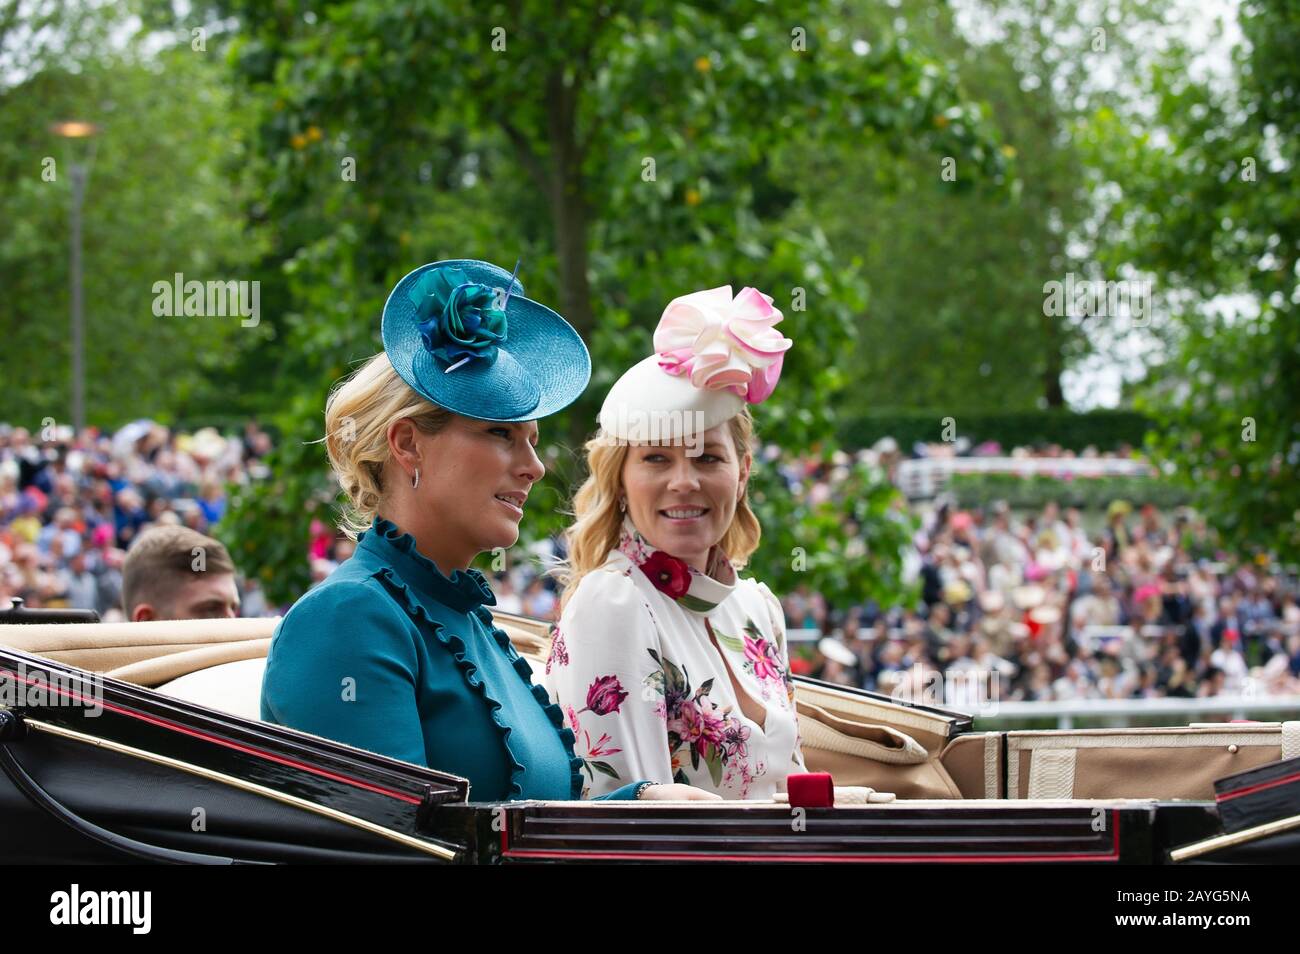 Royal Ascot Ladies Day, Ascot Racecourse, UK. 20th June, 2019. Zara Tindall and Autumn Phillips arrive in a horse drawn carriage in the Royal Procession at Royal Ascot. Credit: Maureen McLean/Alamy Stock Photo